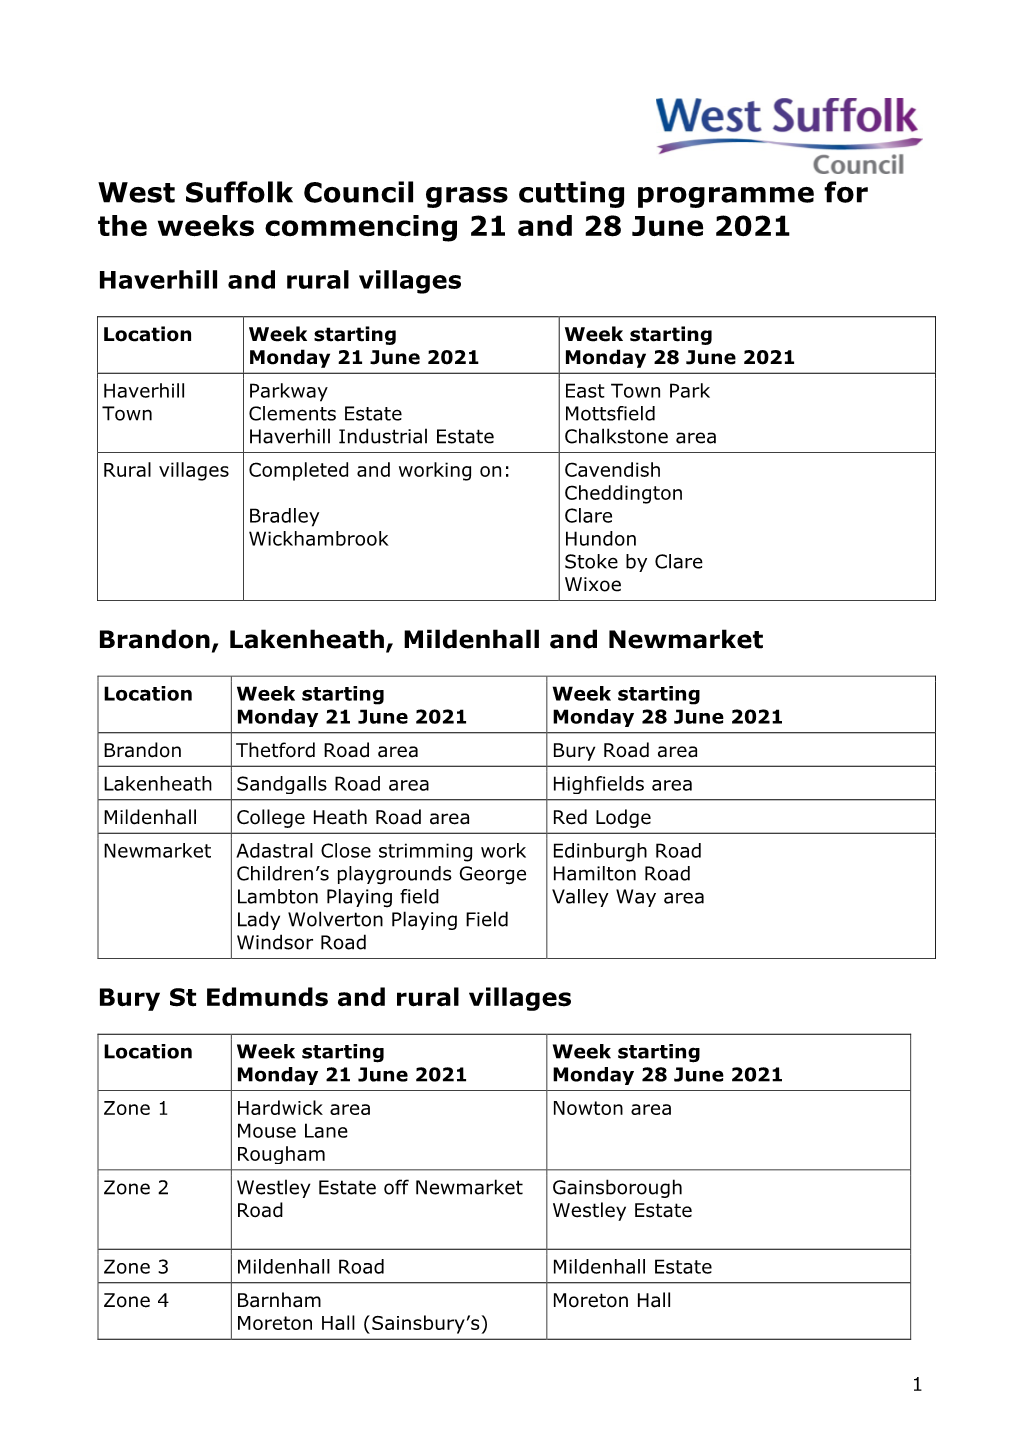 West Suffolk Grass Cutting Programme for Weeks Starting 21 and 28 June